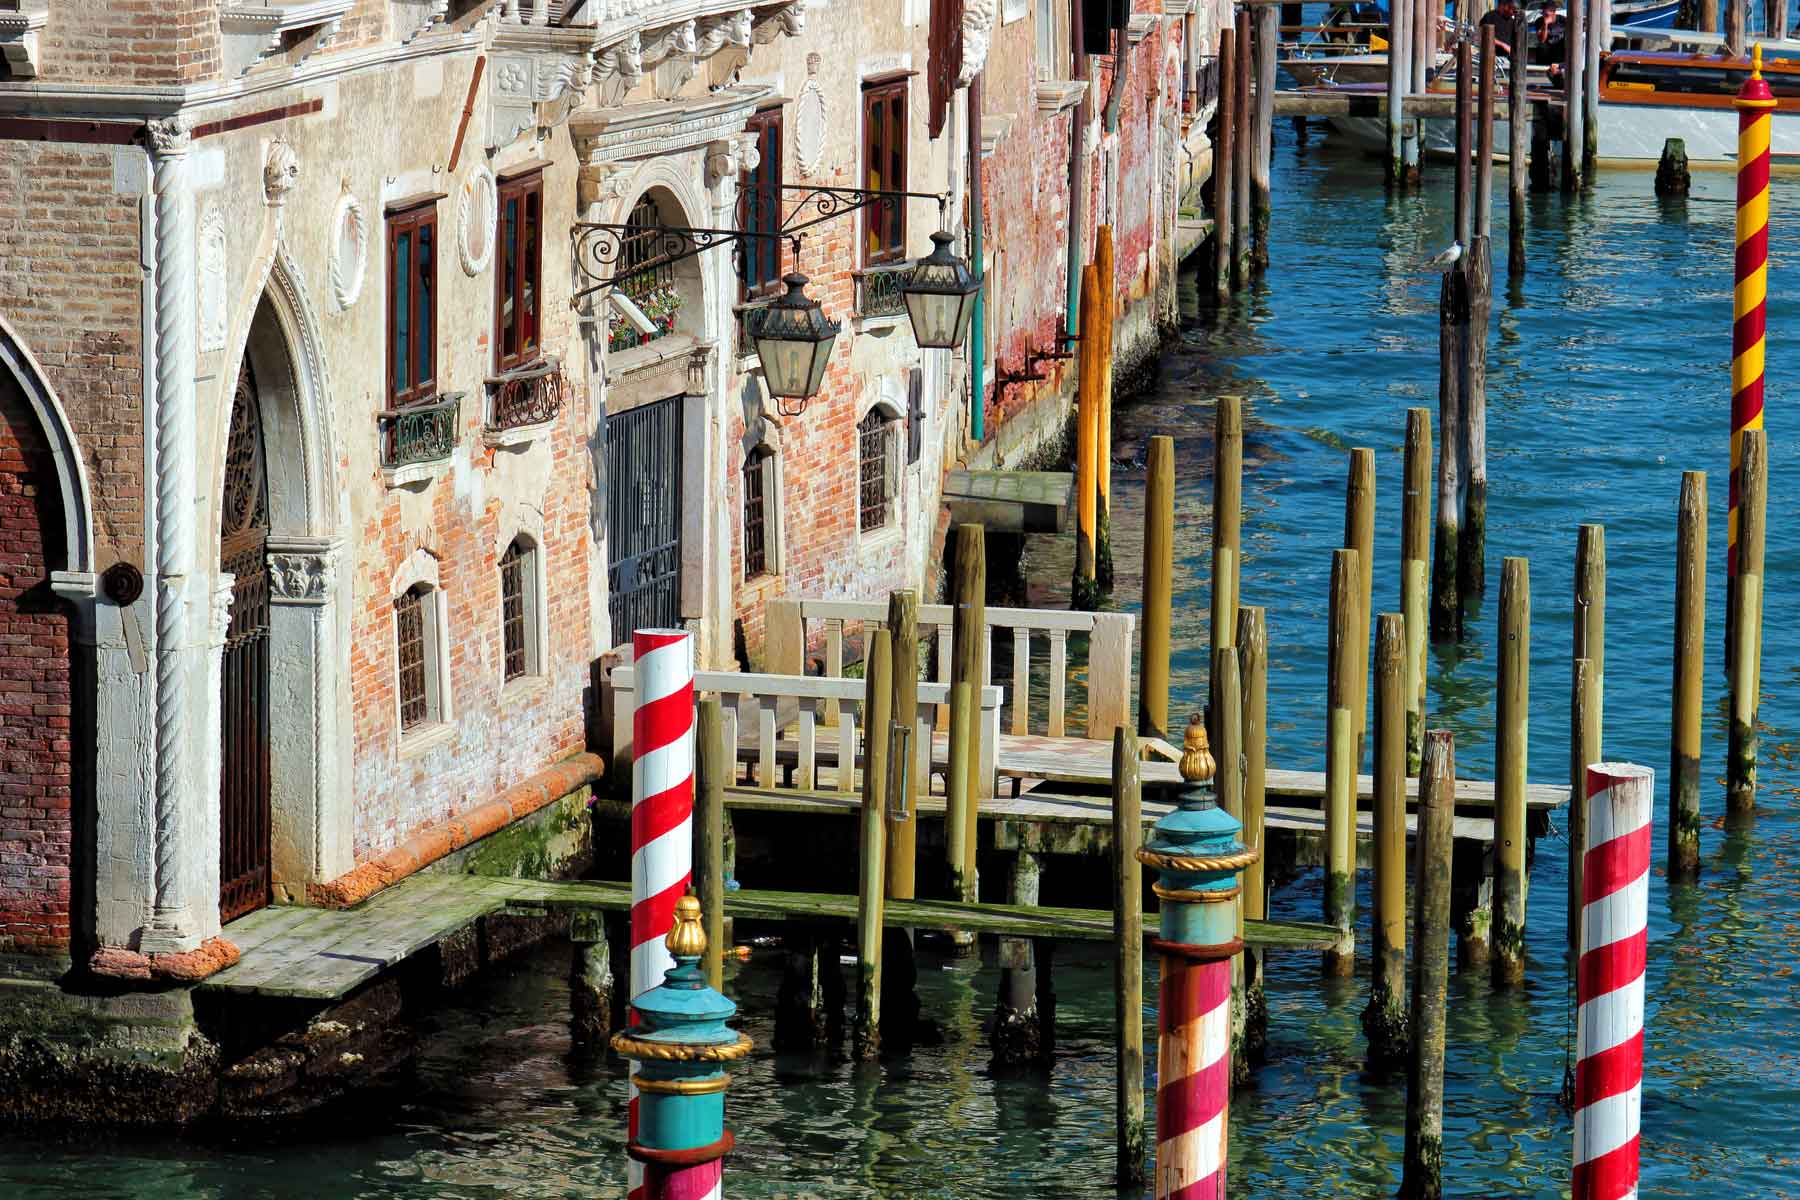 A pier in Venice's Grand Canal